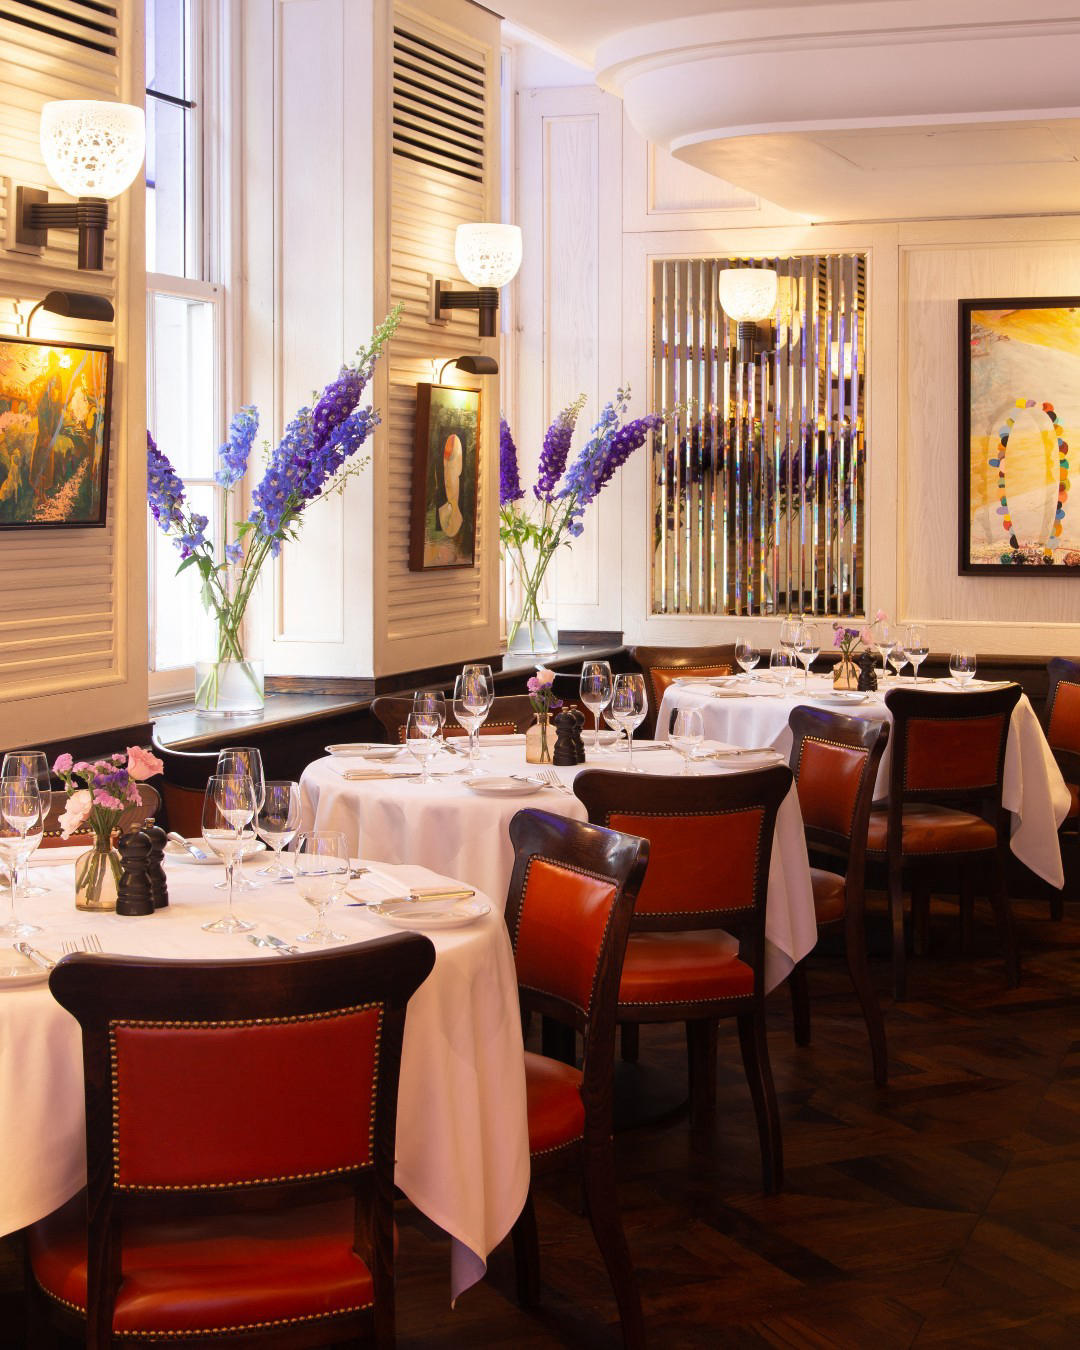 34 Mayfair - Join us for lunch or dinner at 34 Mayfair, and enjoy delicious menus as well as art-dec